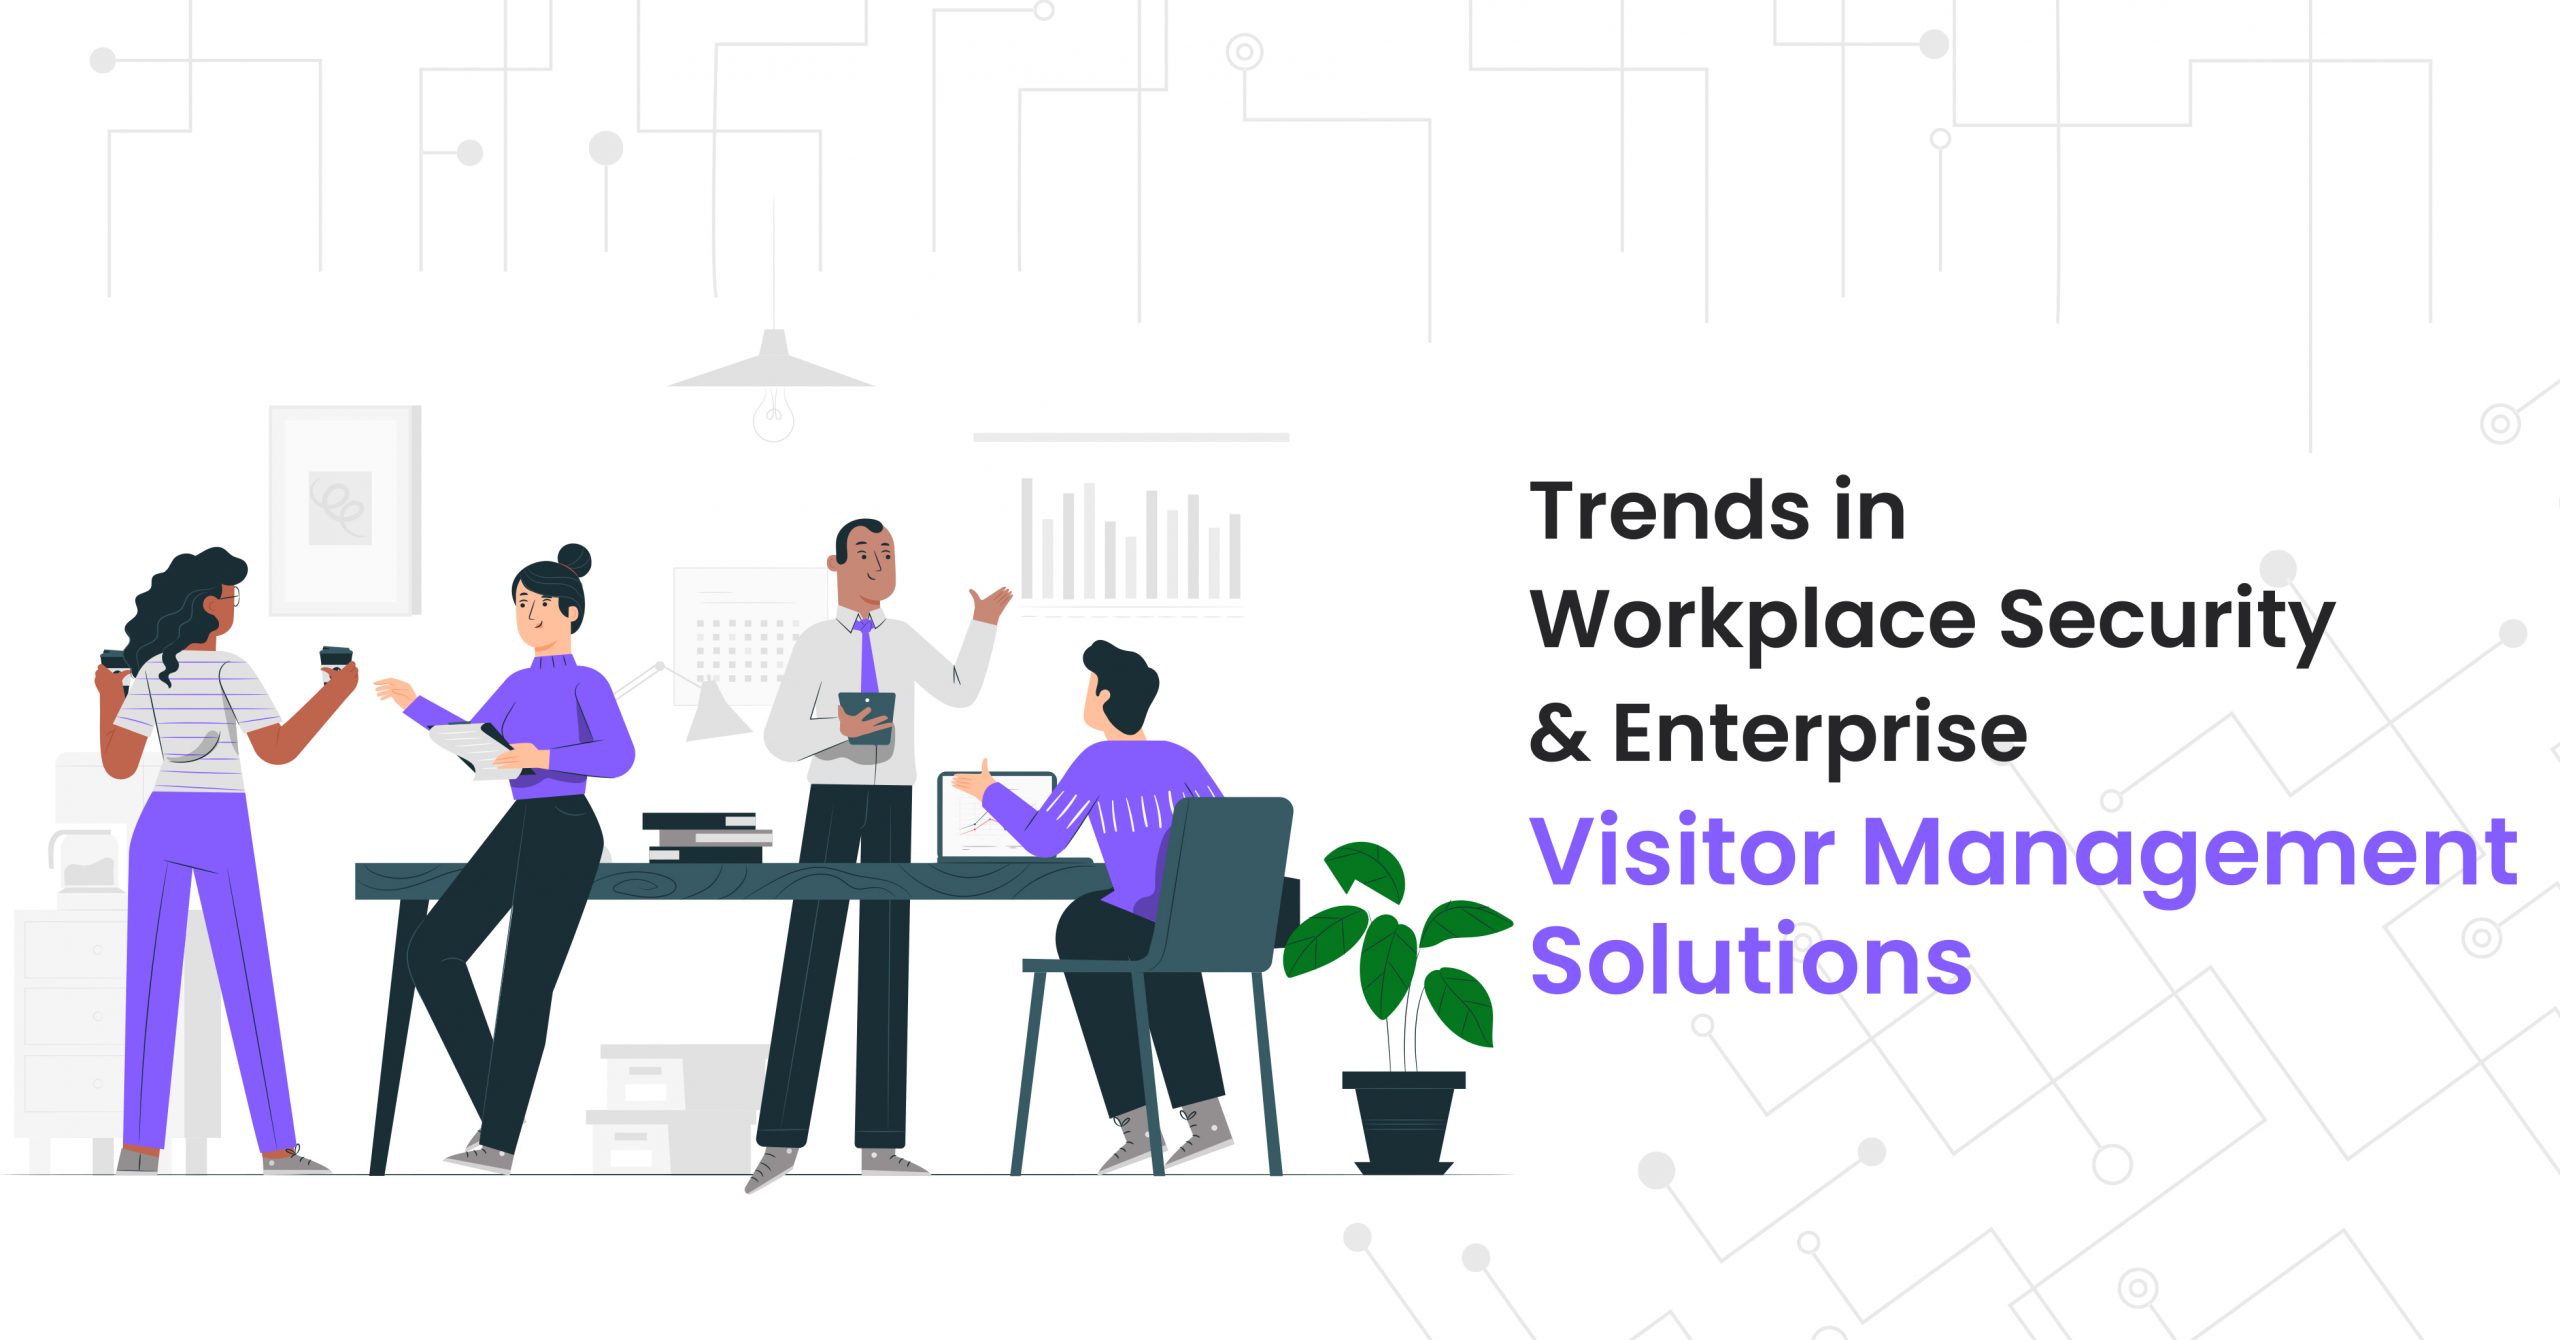 Visitor Management Solutions